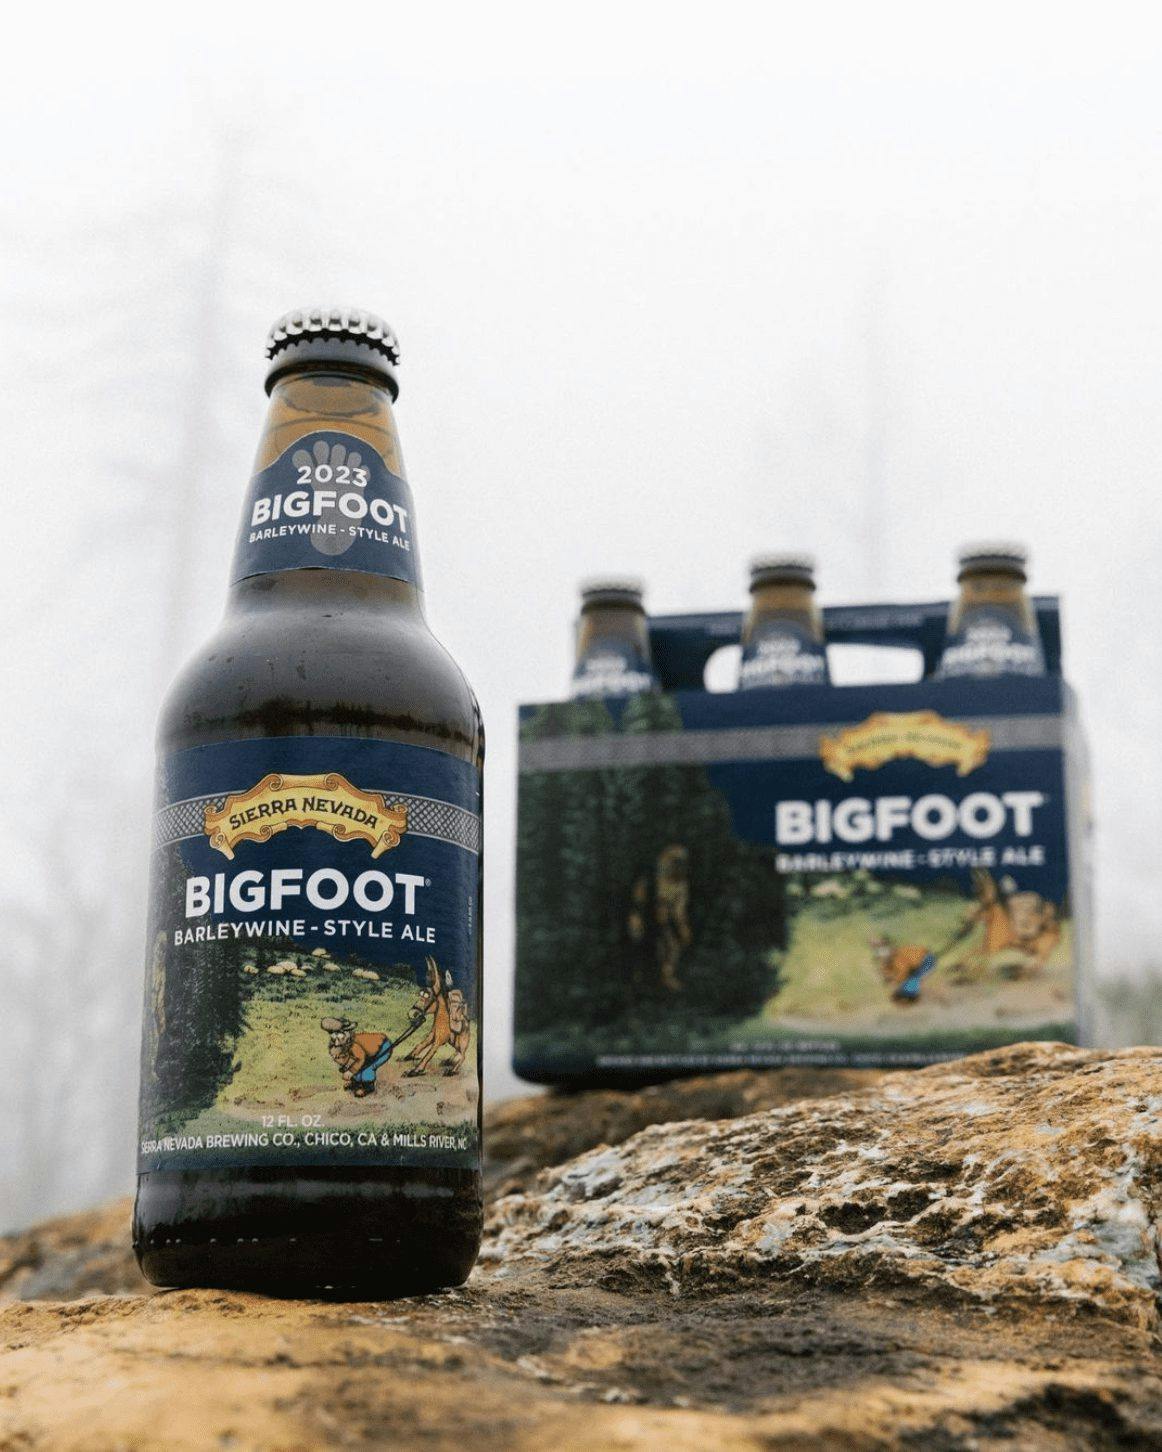 A bottle of Bigfoot sitting next to a 6-pack